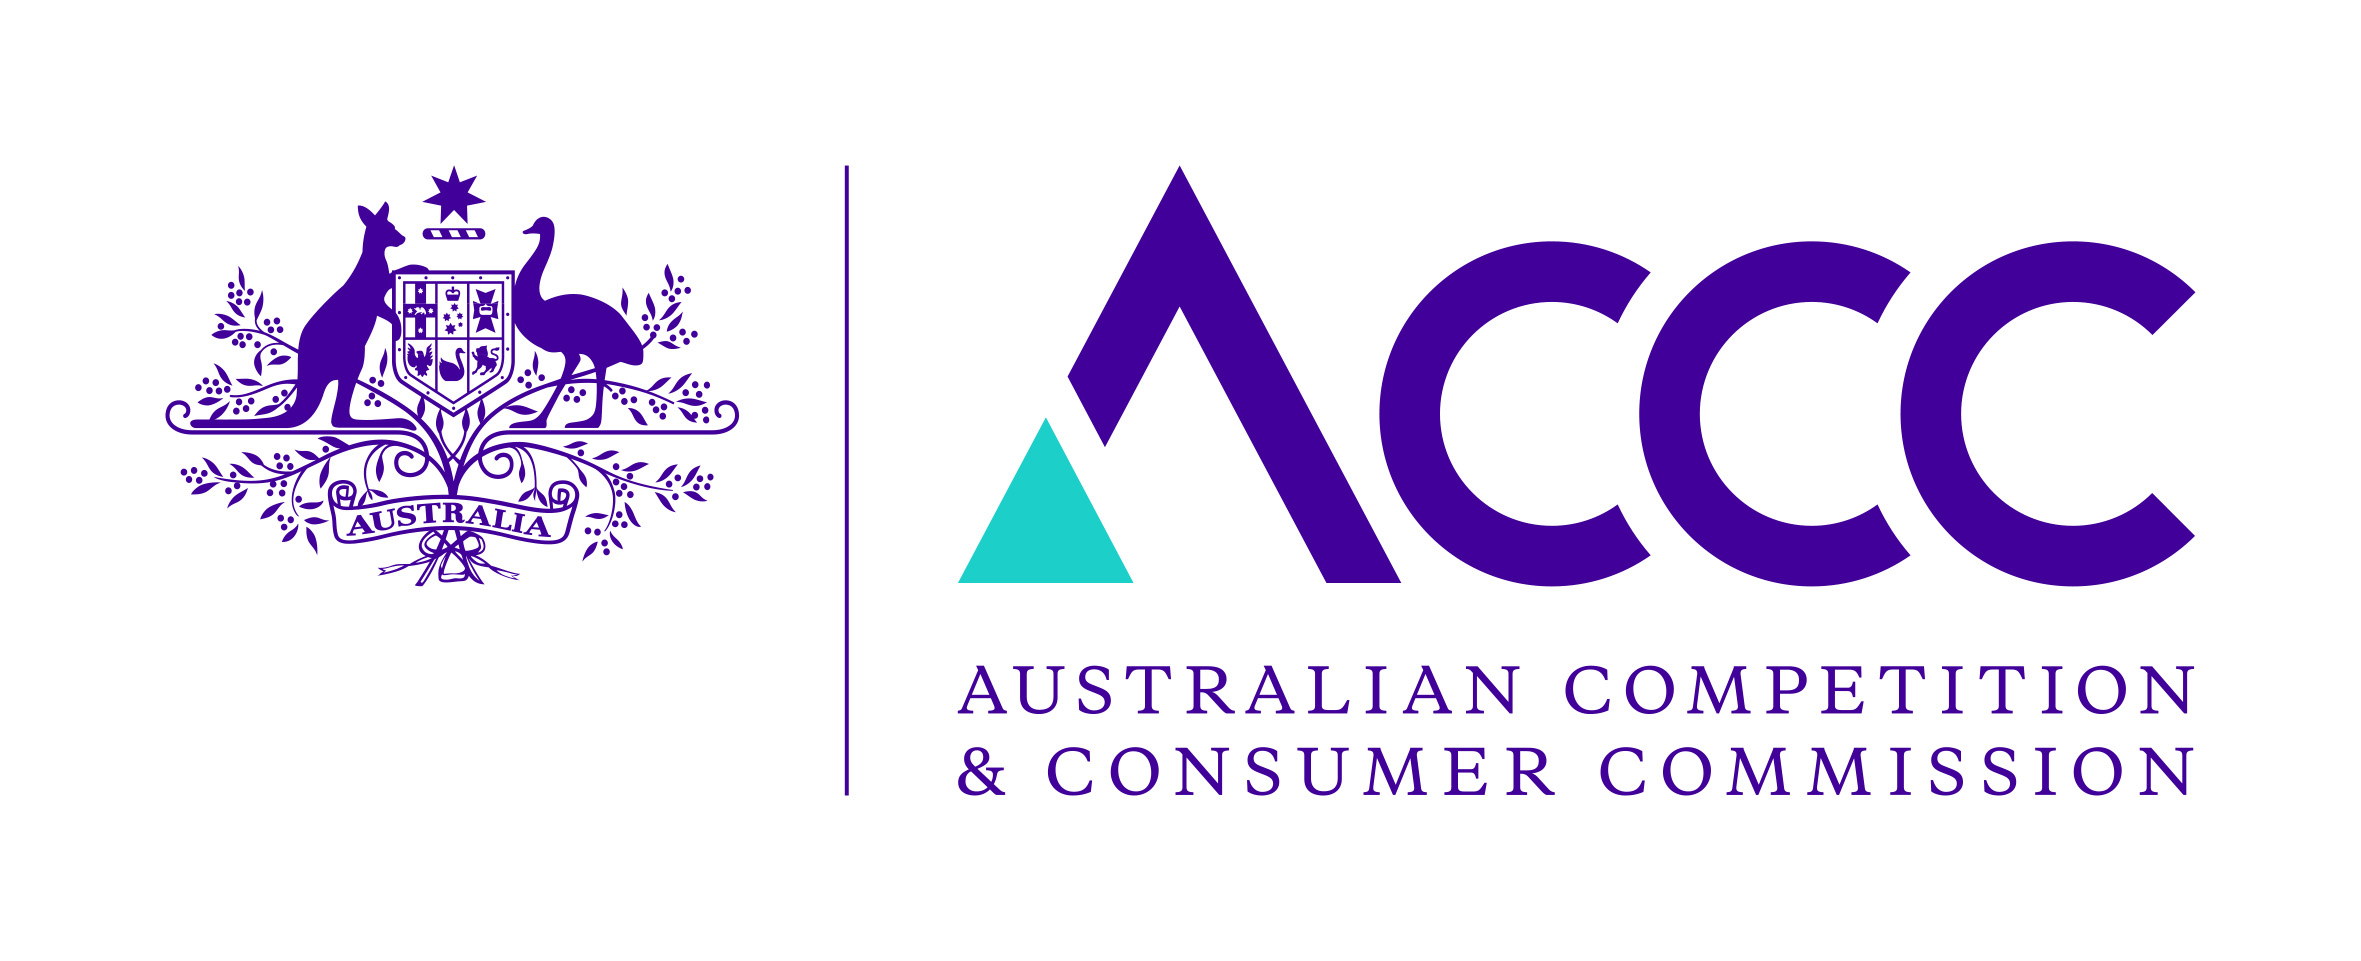 Australian Competition and Consumer Commission (ACCC)